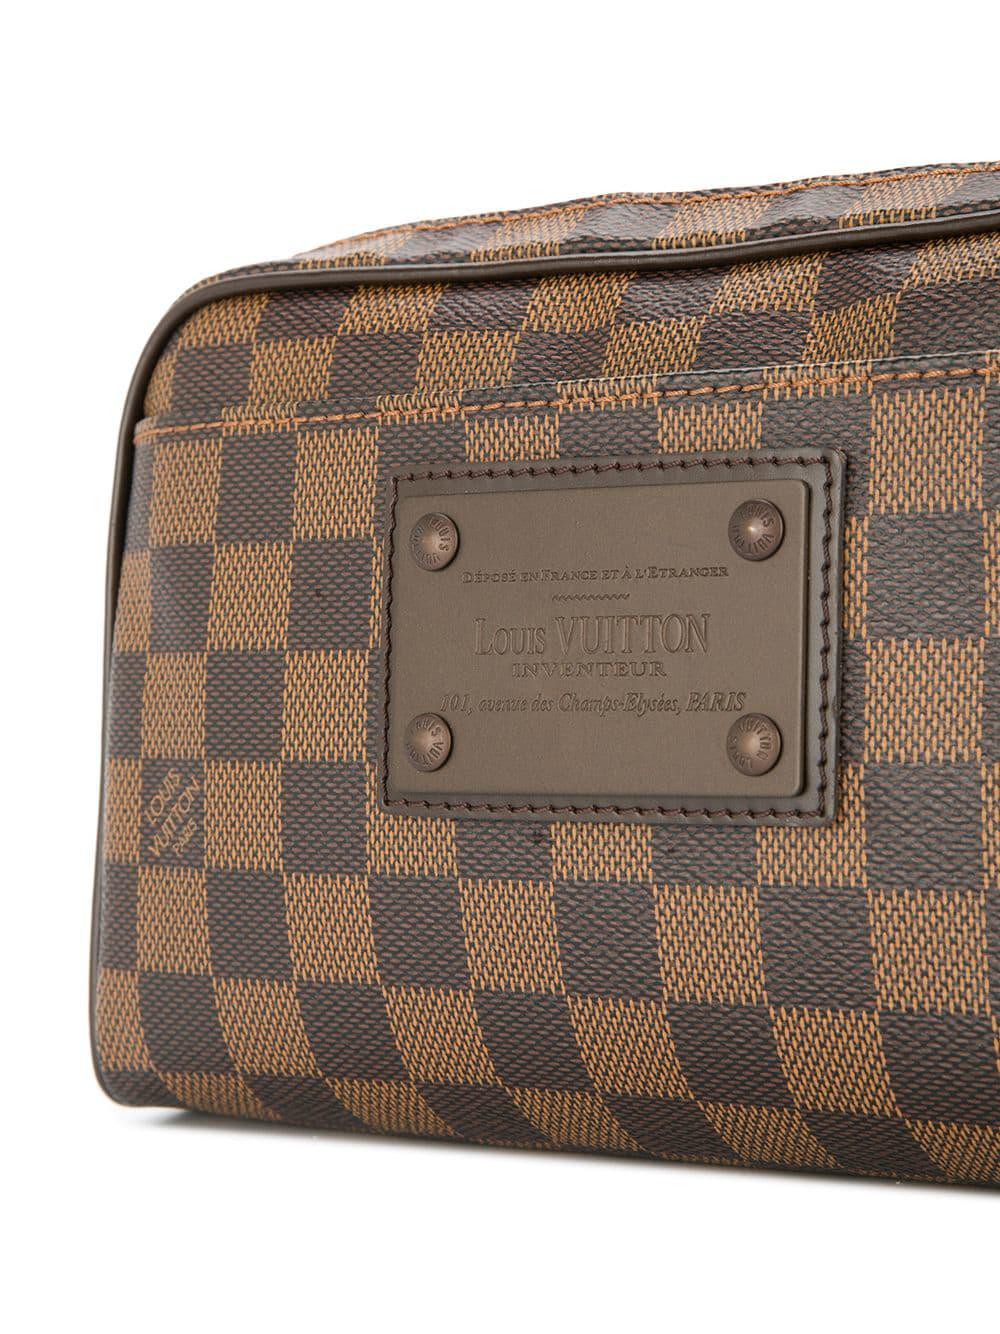 Louis+Vuitton+Brooklyn+Bum+Bag+Brown+Leather for sale online